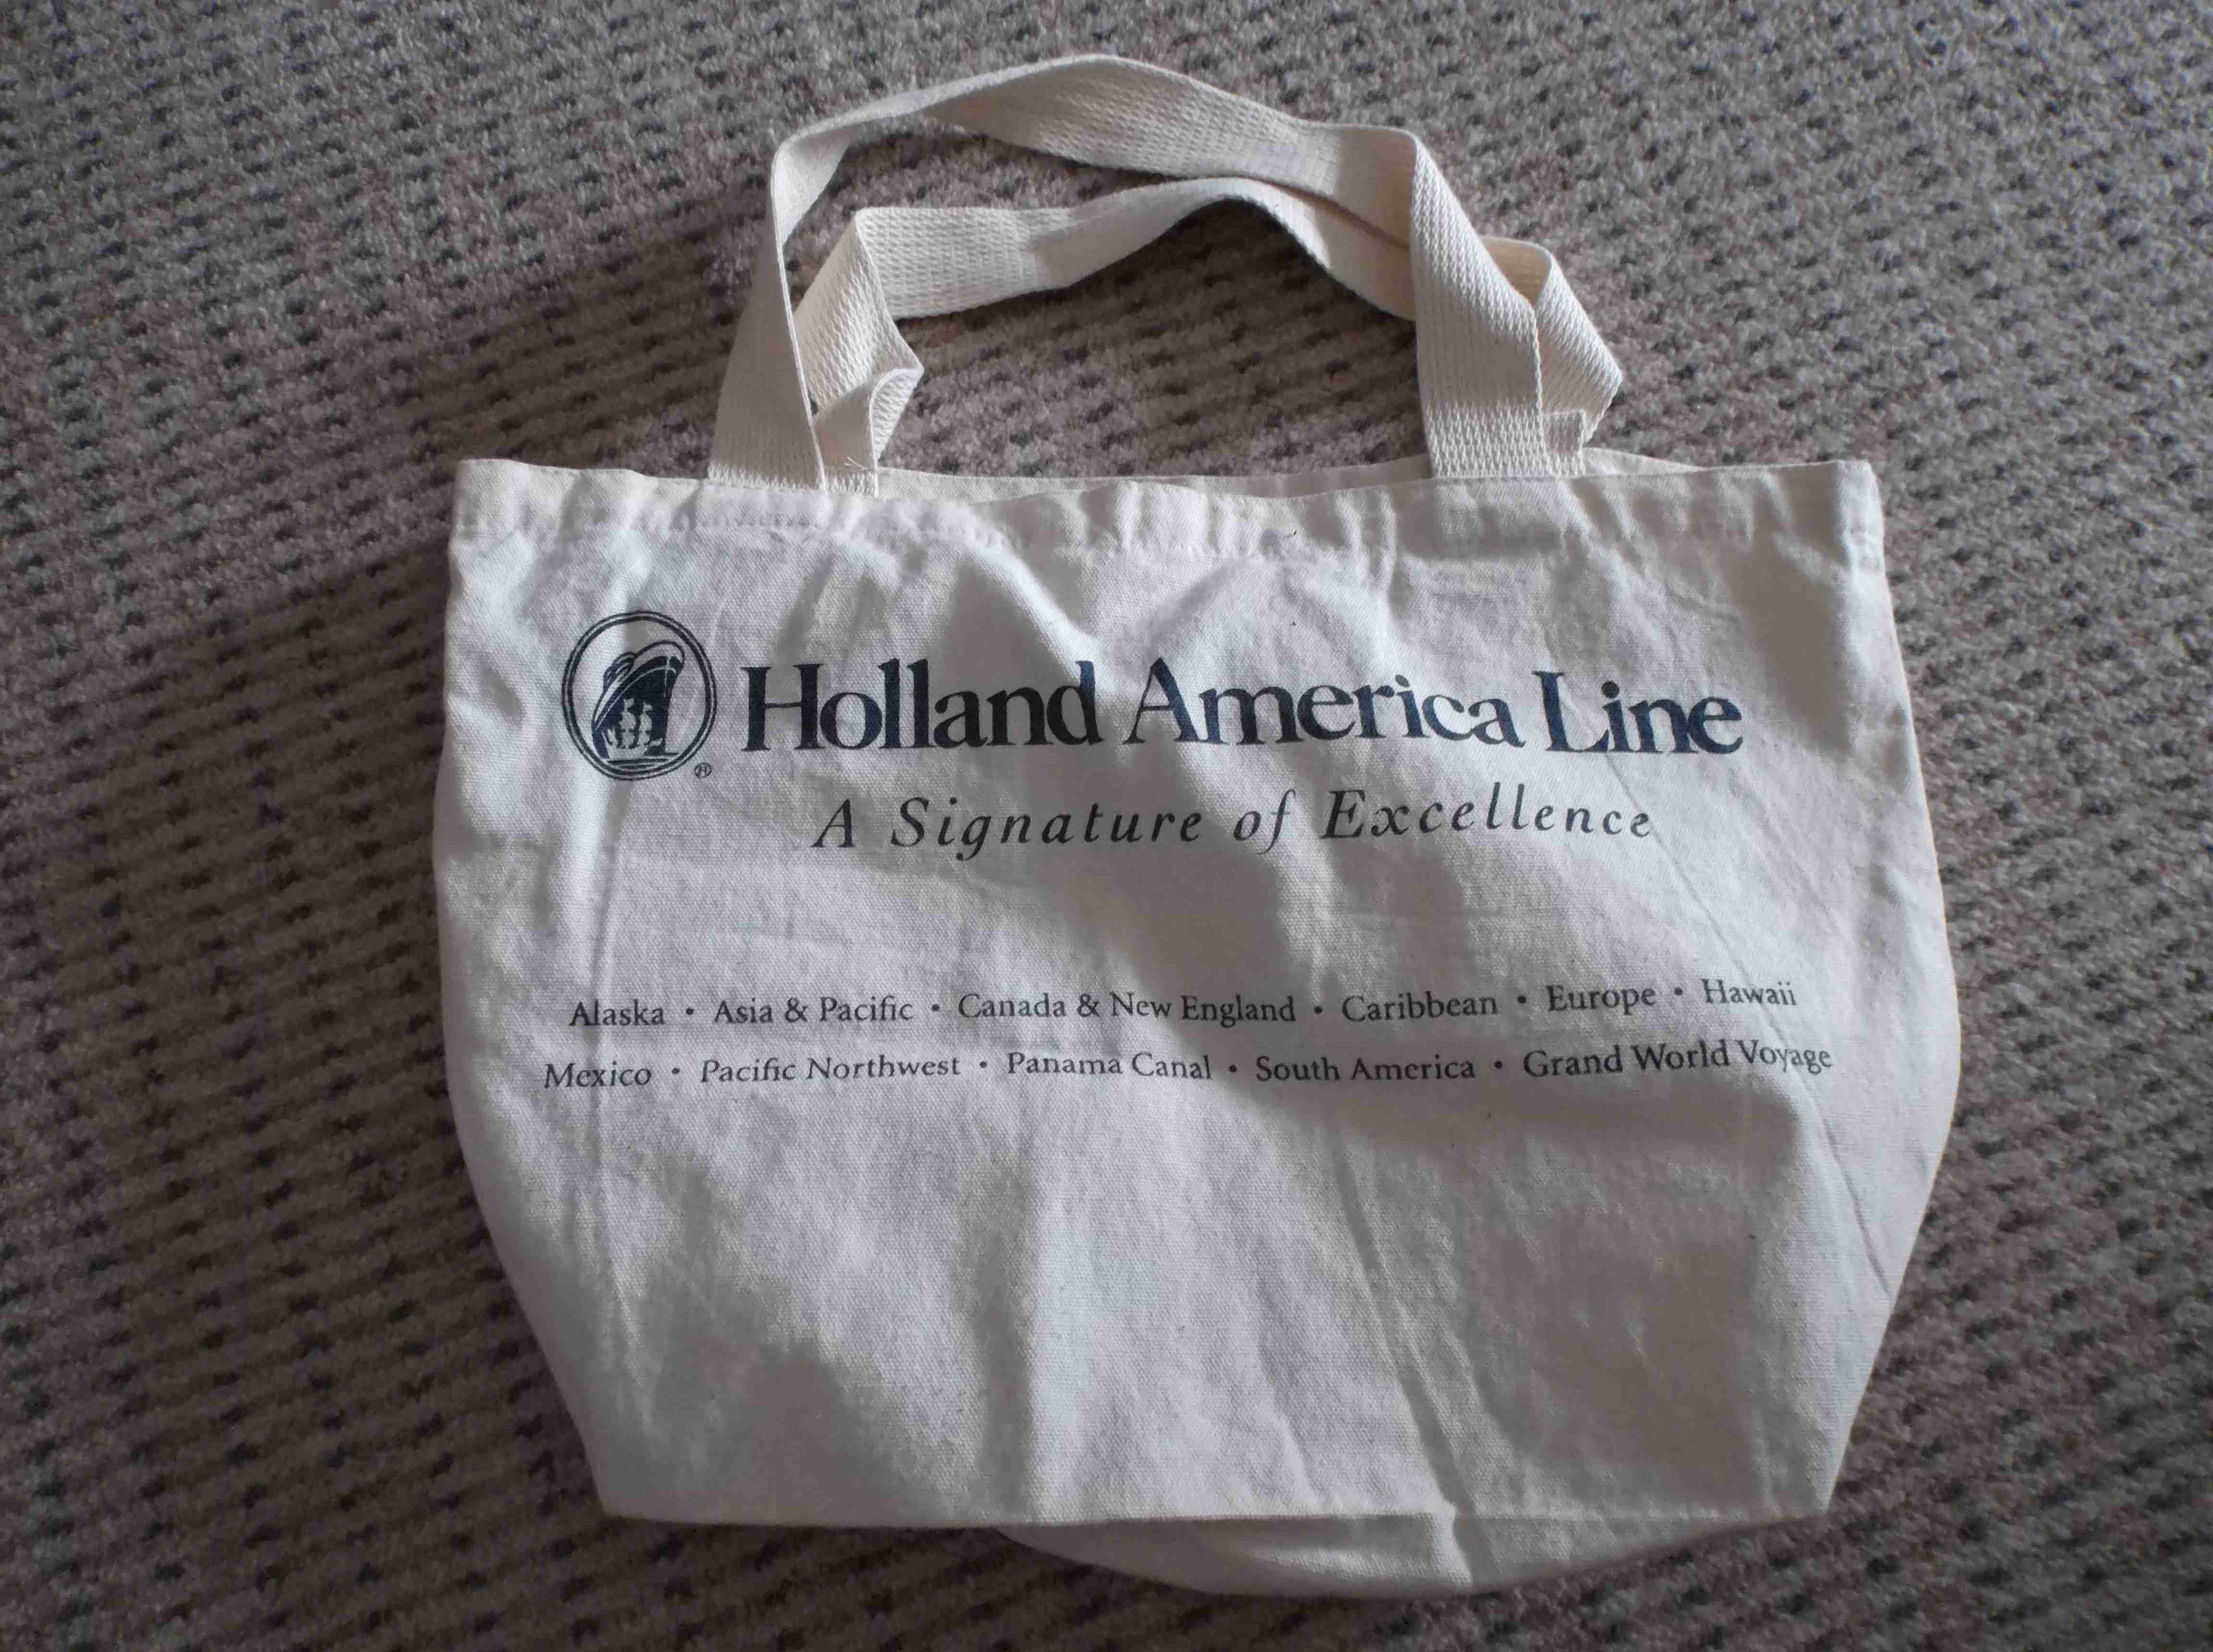 EARLY EXAMPLE SOUVENIR ONBOARD CANVAS BAG SOUVENIR FROM THE HOLLAND AMERICA LINE